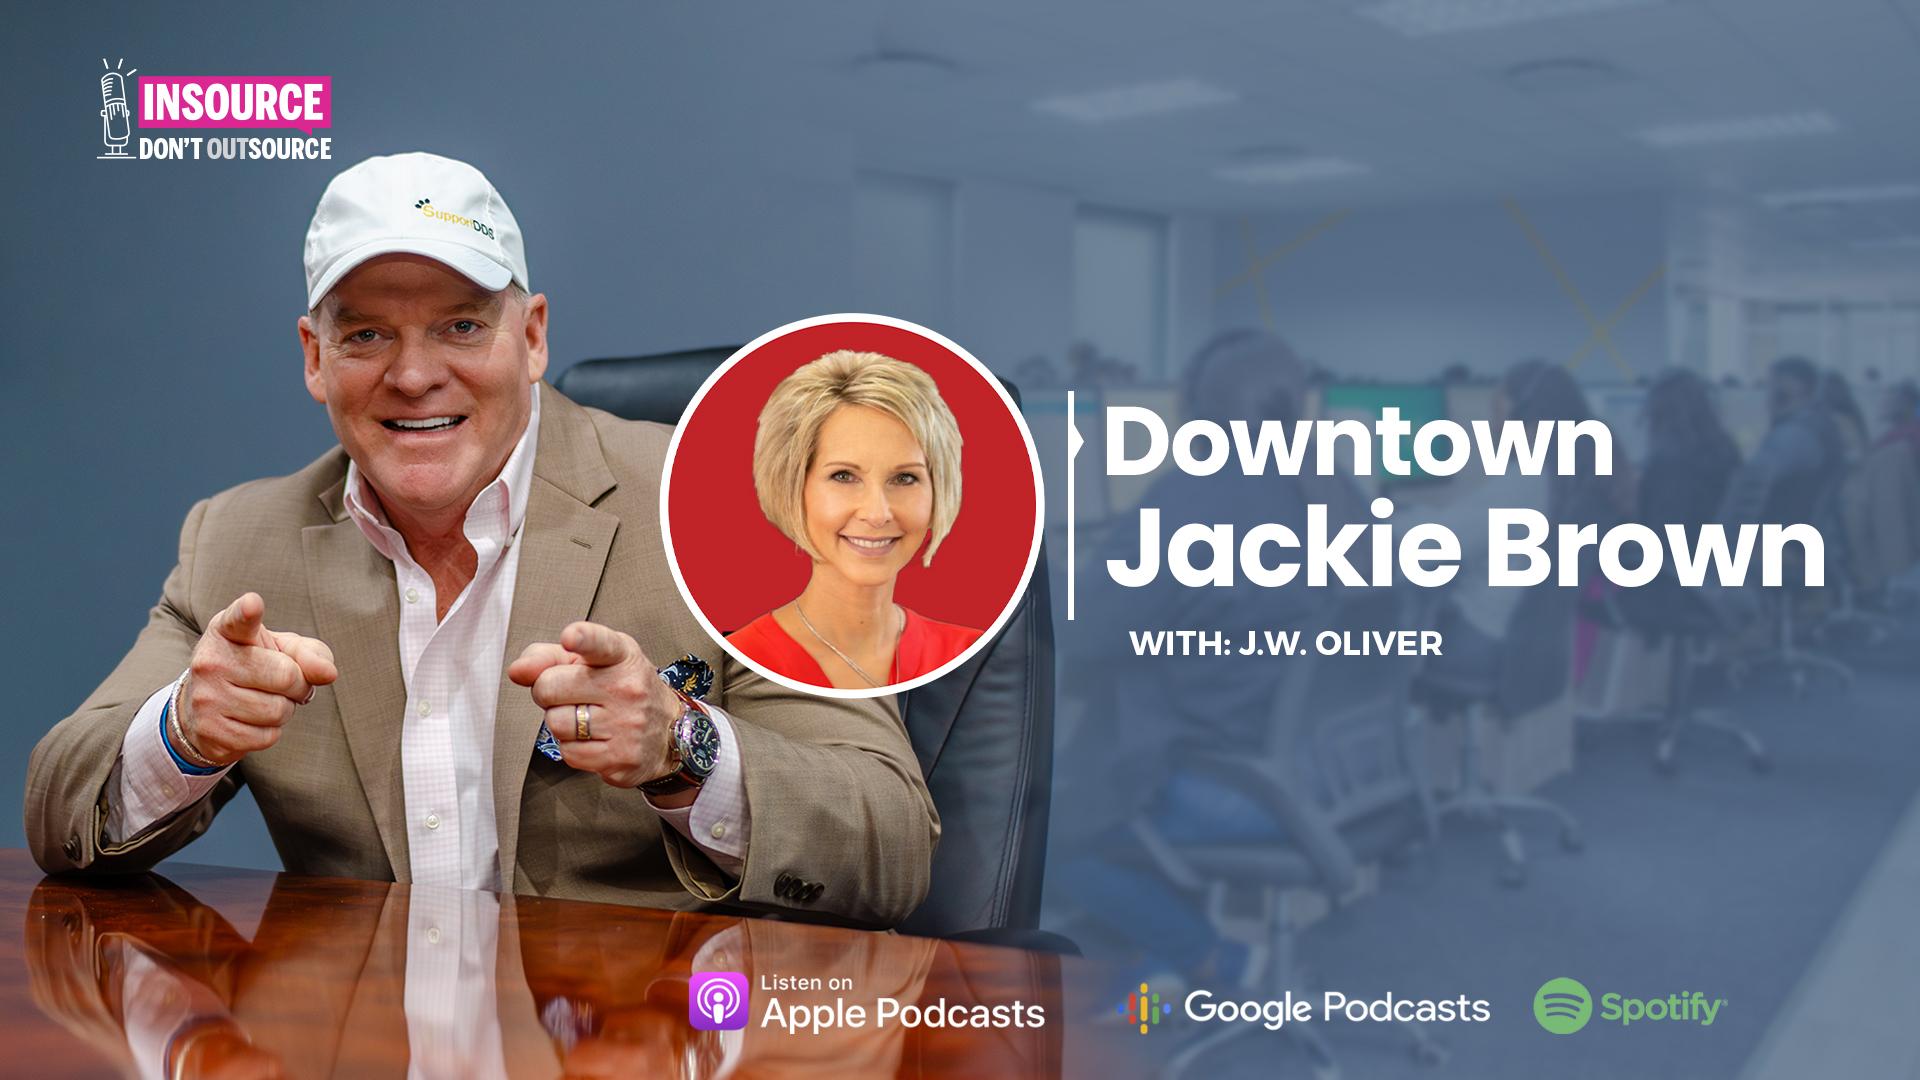 Episode 38 | Downtown Jackie Brown with J.W. Oliver